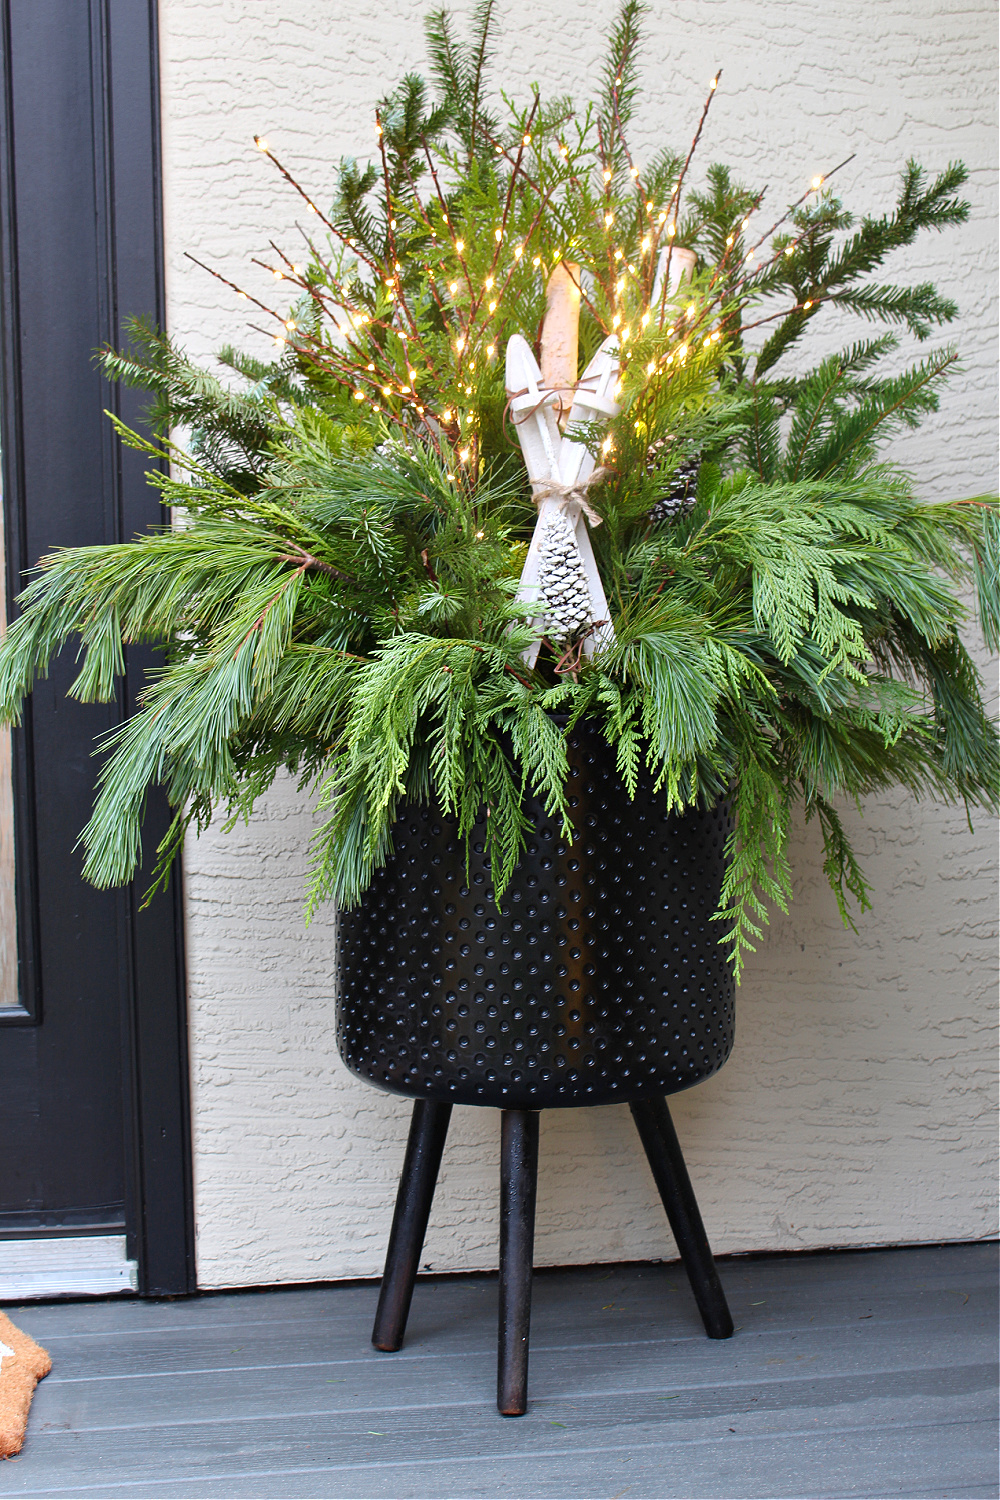 Christmas planter with fresh greenery and lighted branches.